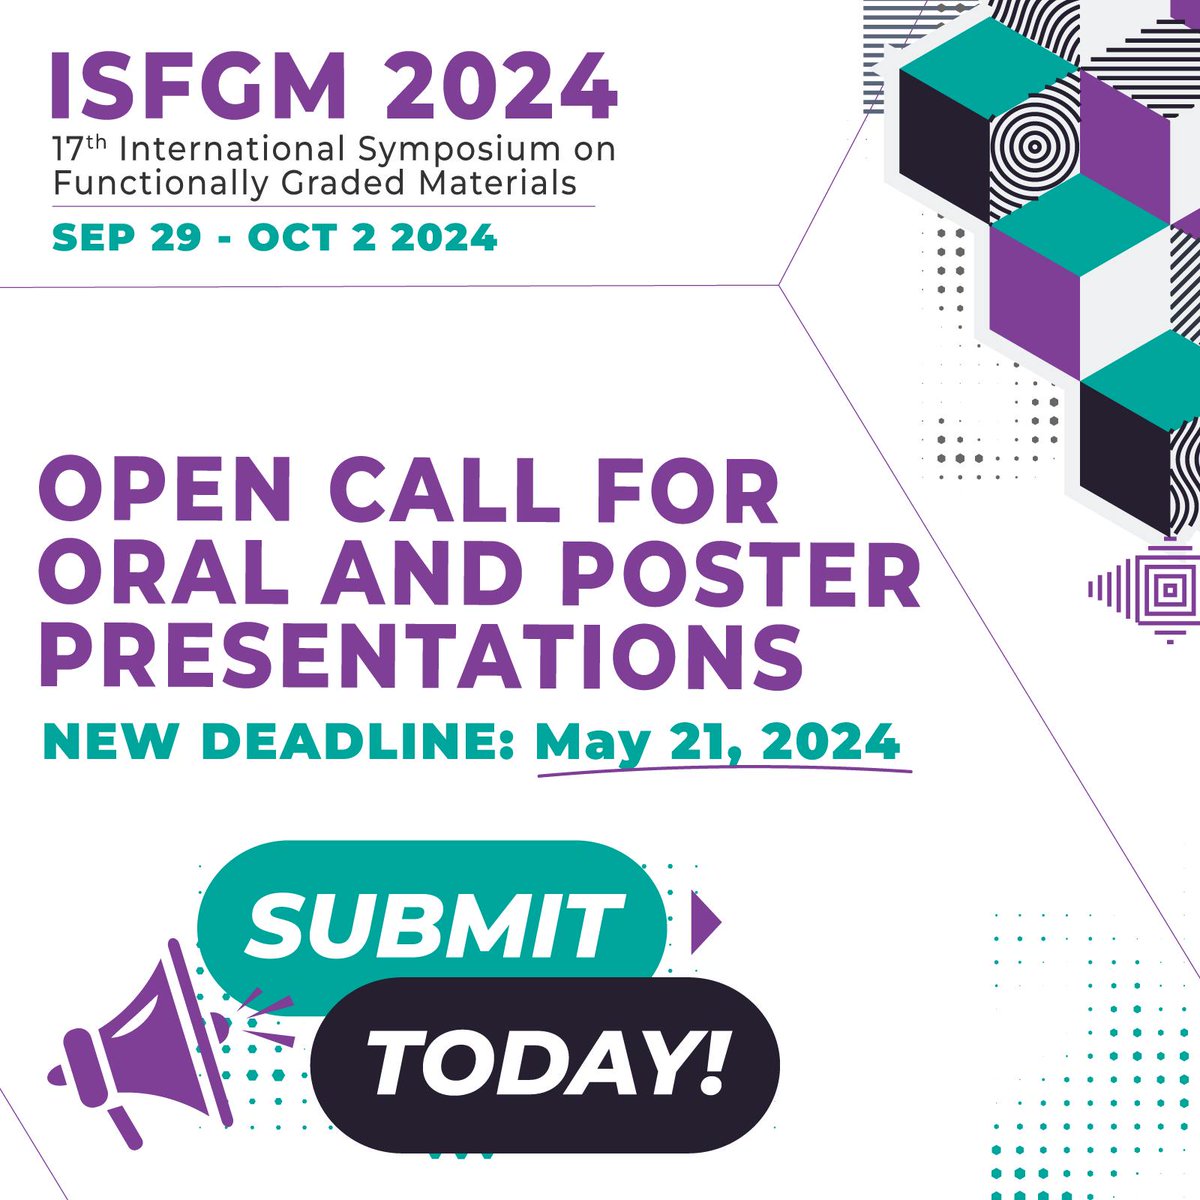 🚨 Last hours to submit your abstract for #ISFGM2024! 

🏅Our expert panel will evaluate all poster presentations. Be ready to snag one of these coveted awards:
🌟 3 Awards for Best Oral Presentations
🌟 3 Awards for Best Posters

+ events.inl.int/isfgm2024

 #inlnano #abstracts